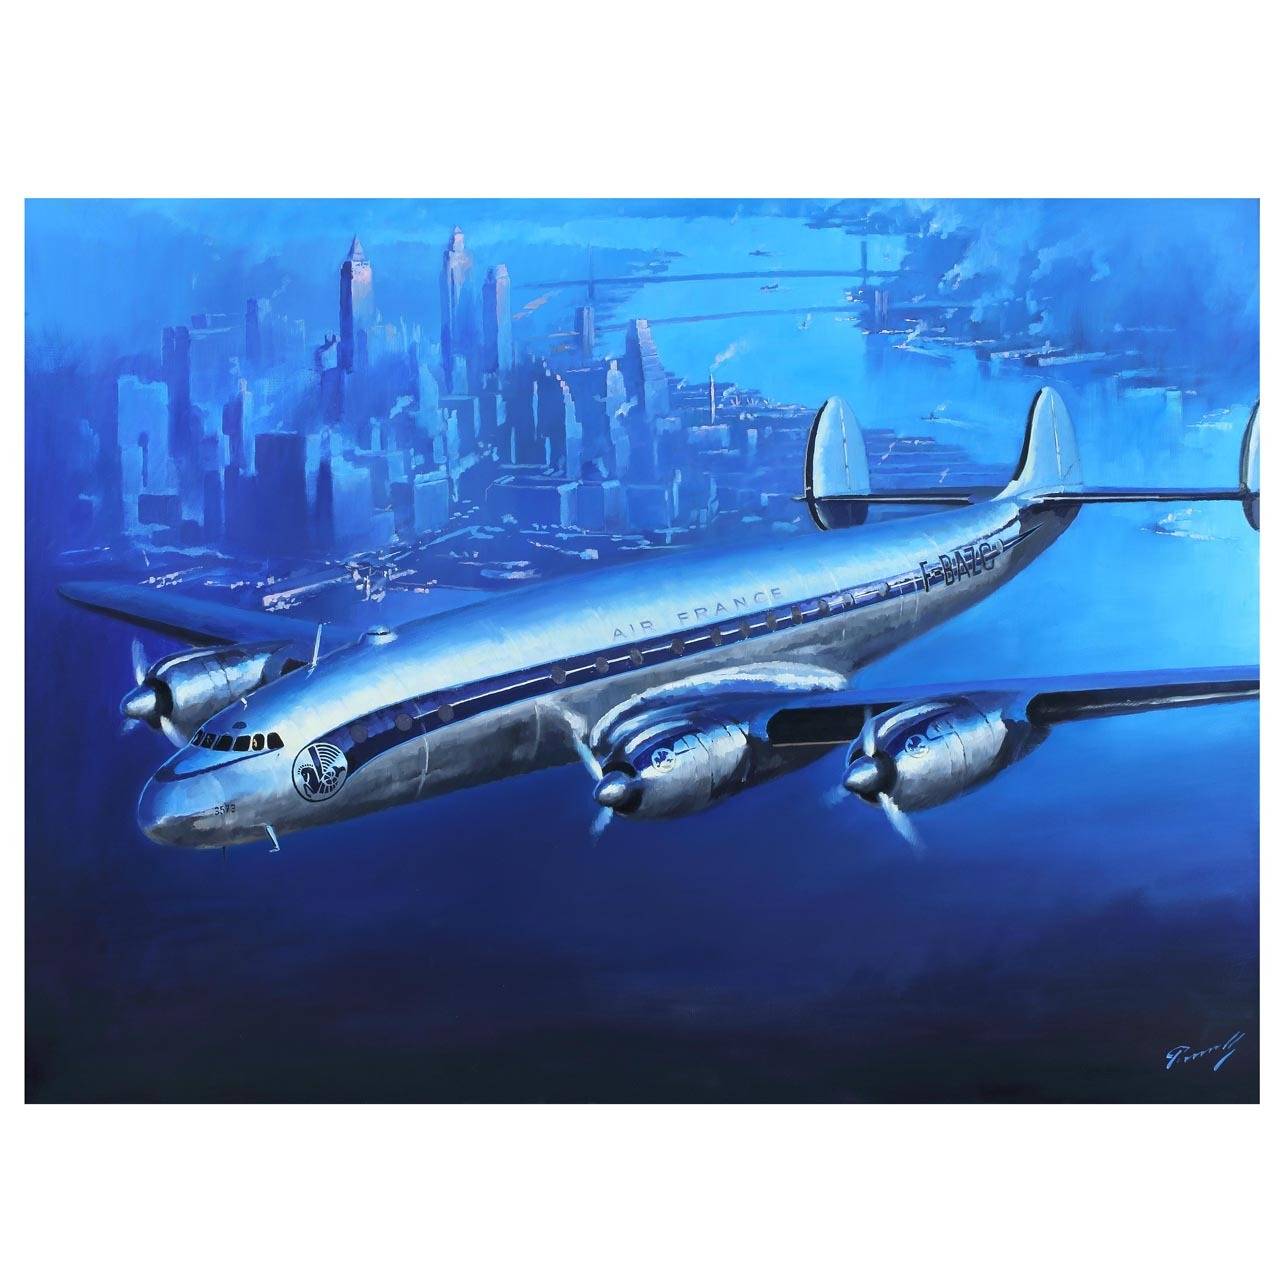 Lucio Perinotto 'Air France Constellation' Painting For Sale